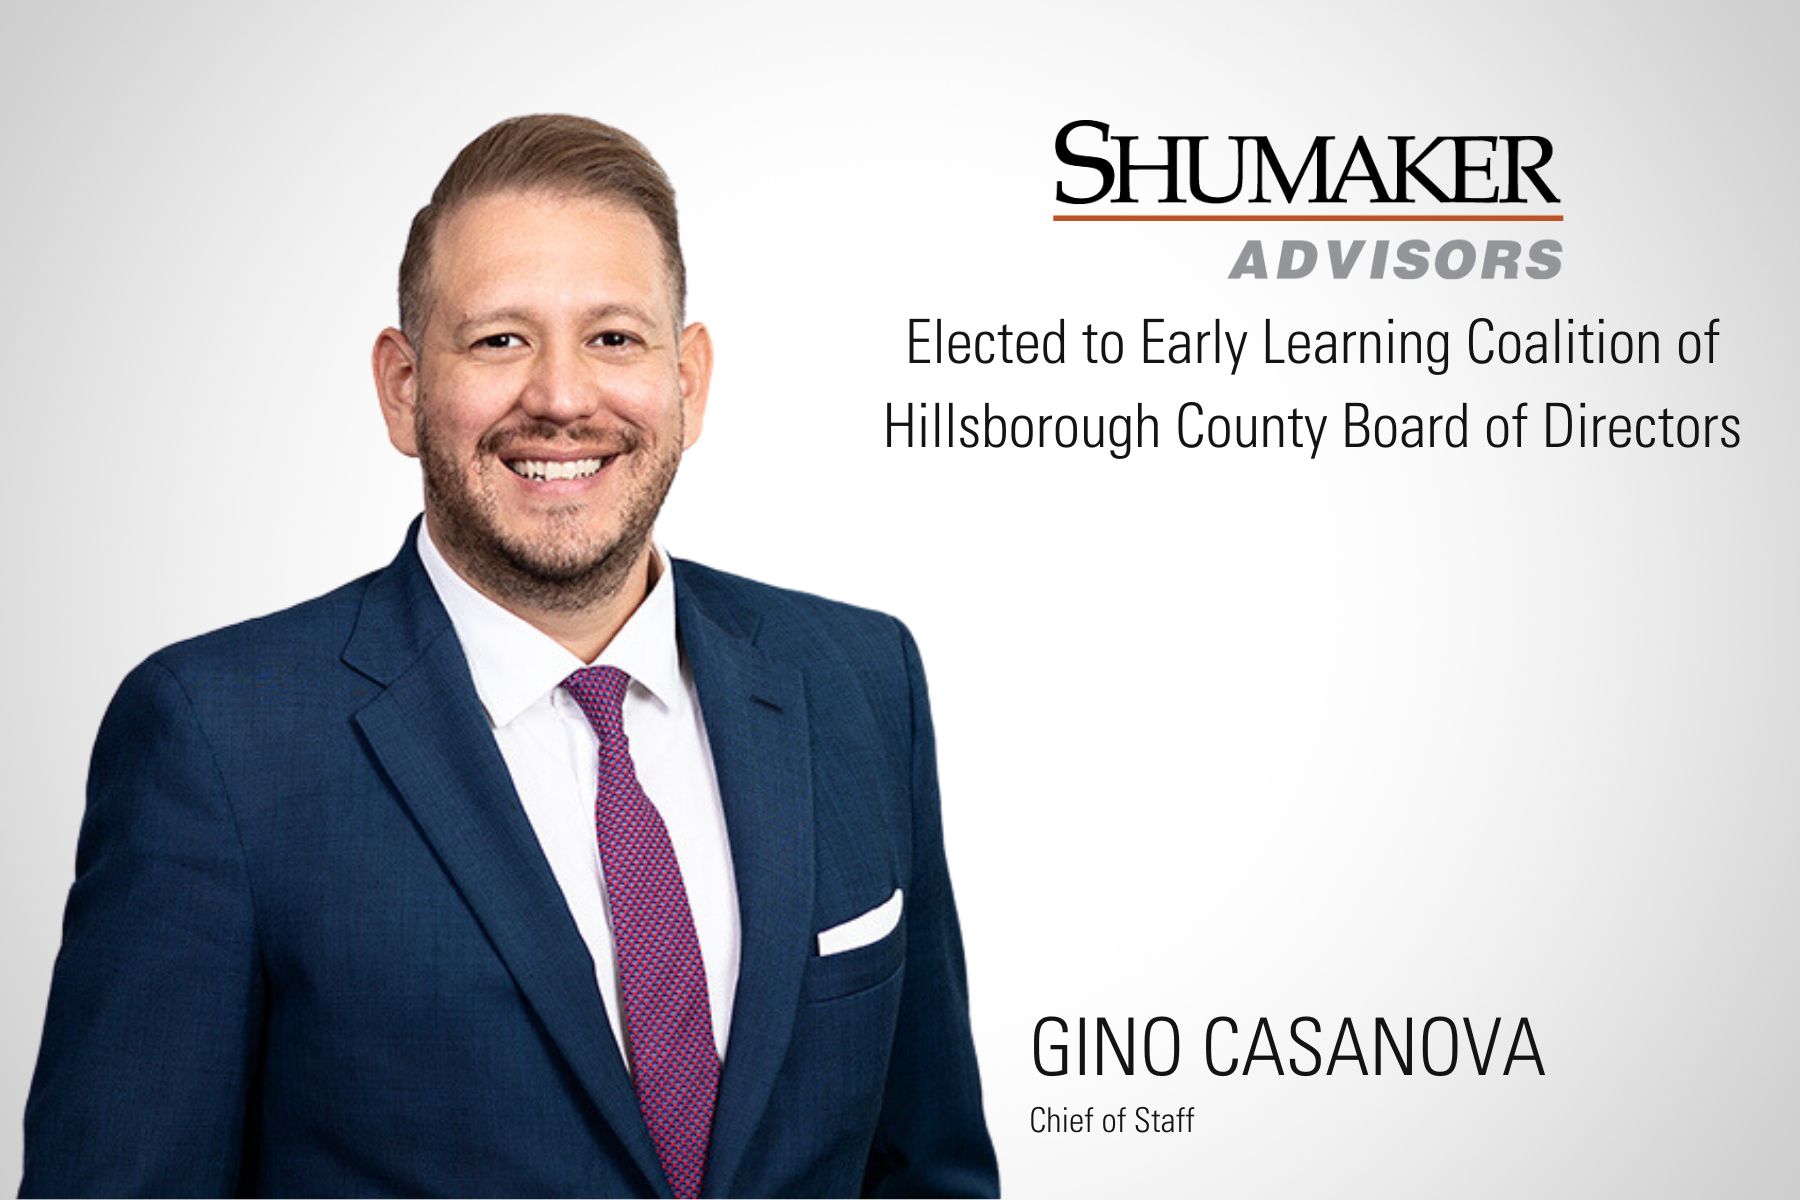 Community-Centric Organization’s Chief of Staff Elected to Early Learning Coalition of Hillsborough County Board of Directors